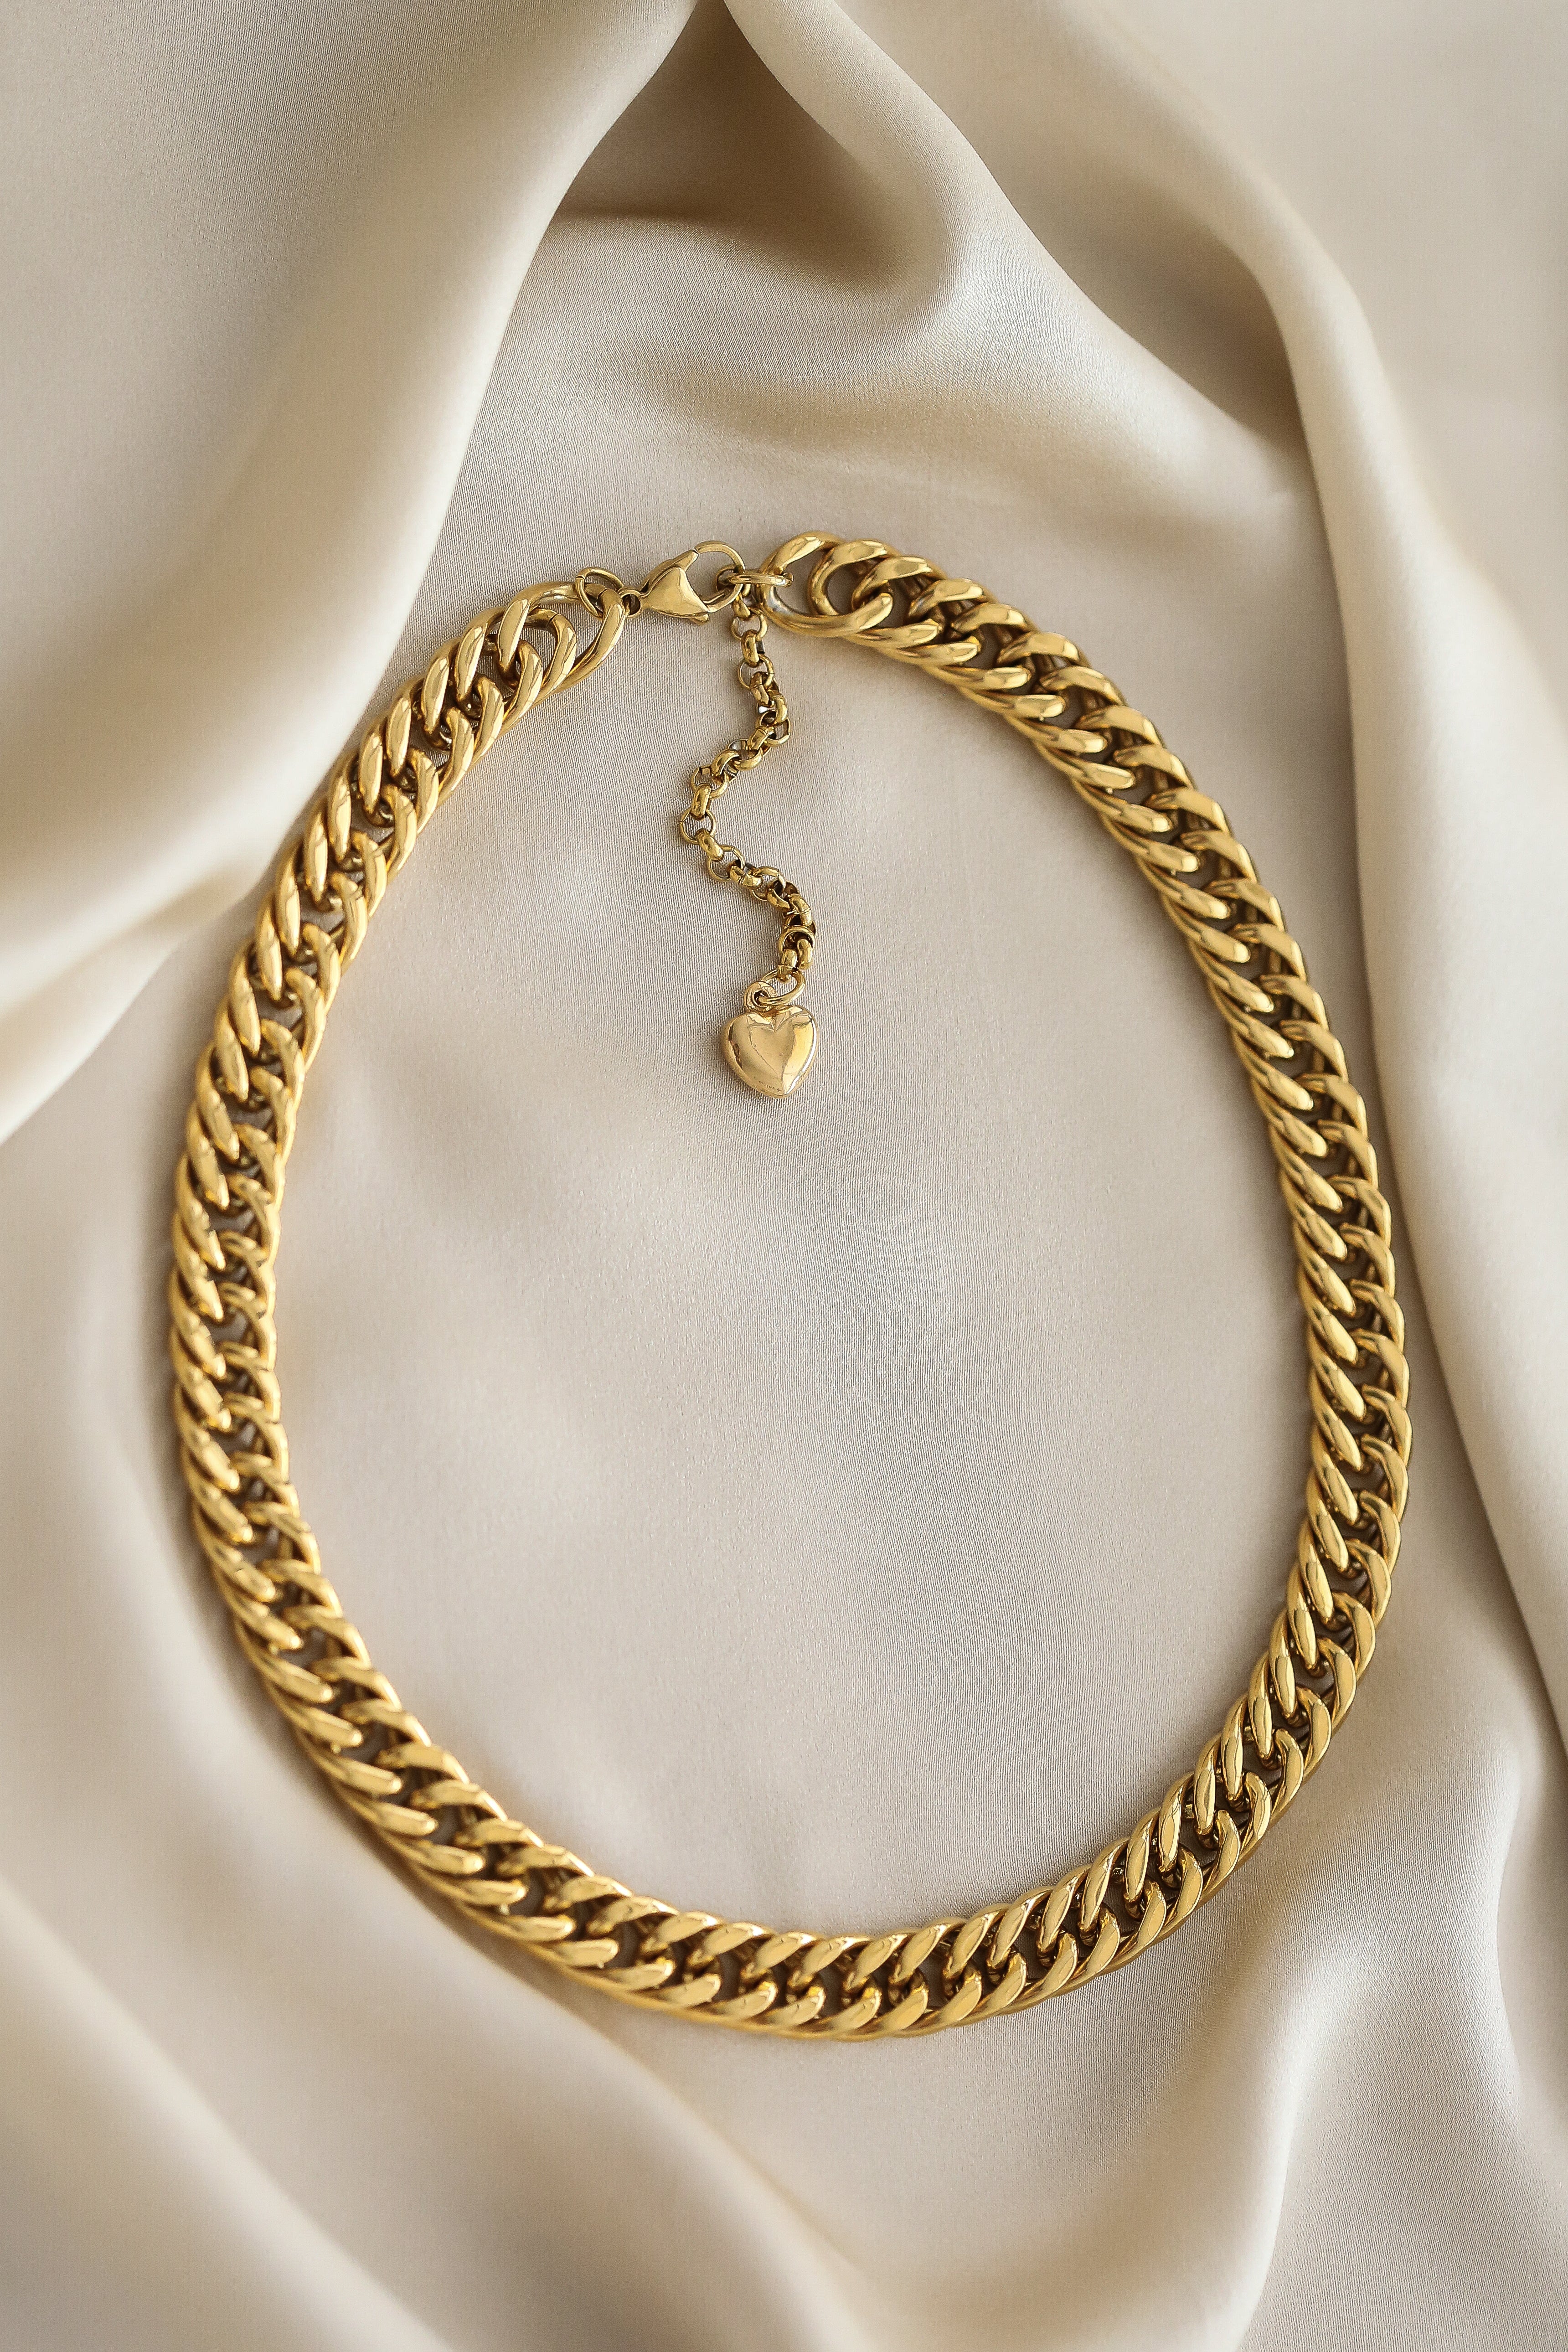 Kim Necklace - Boutique Minimaliste has waterproof, durable, elegant and vintage inspired jewelry